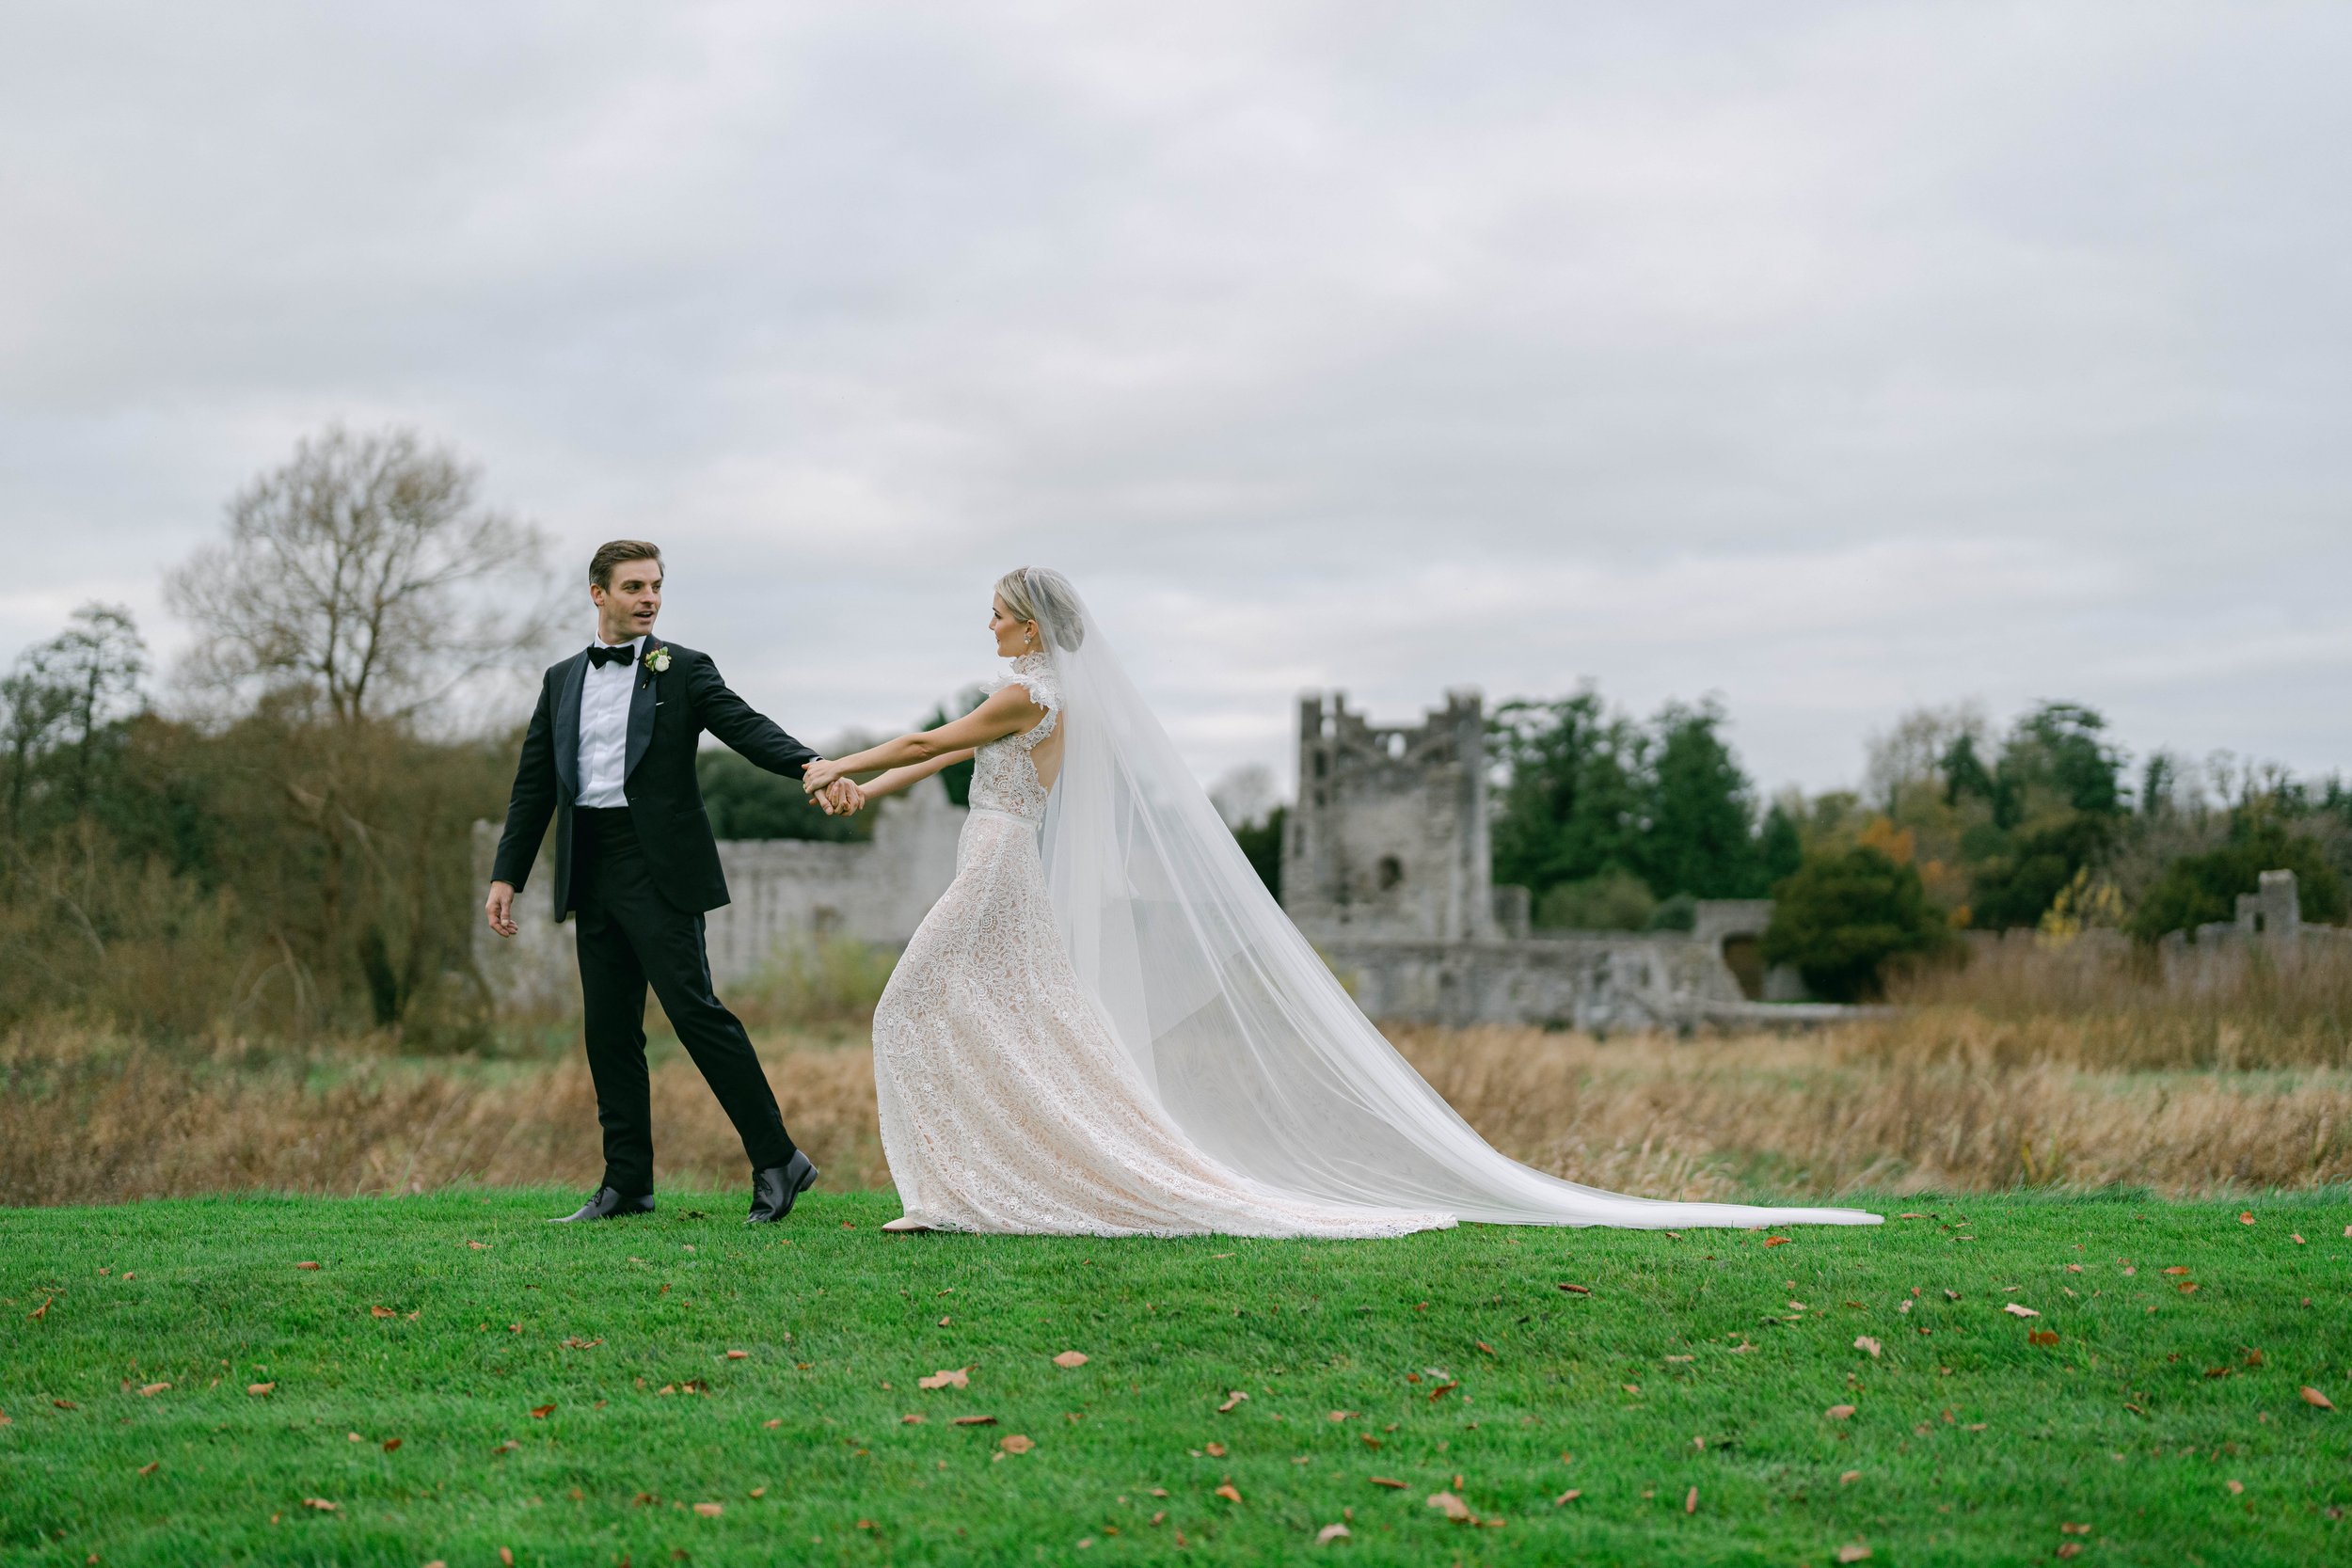 Lucy and Paul’s first look at Desmond Castle